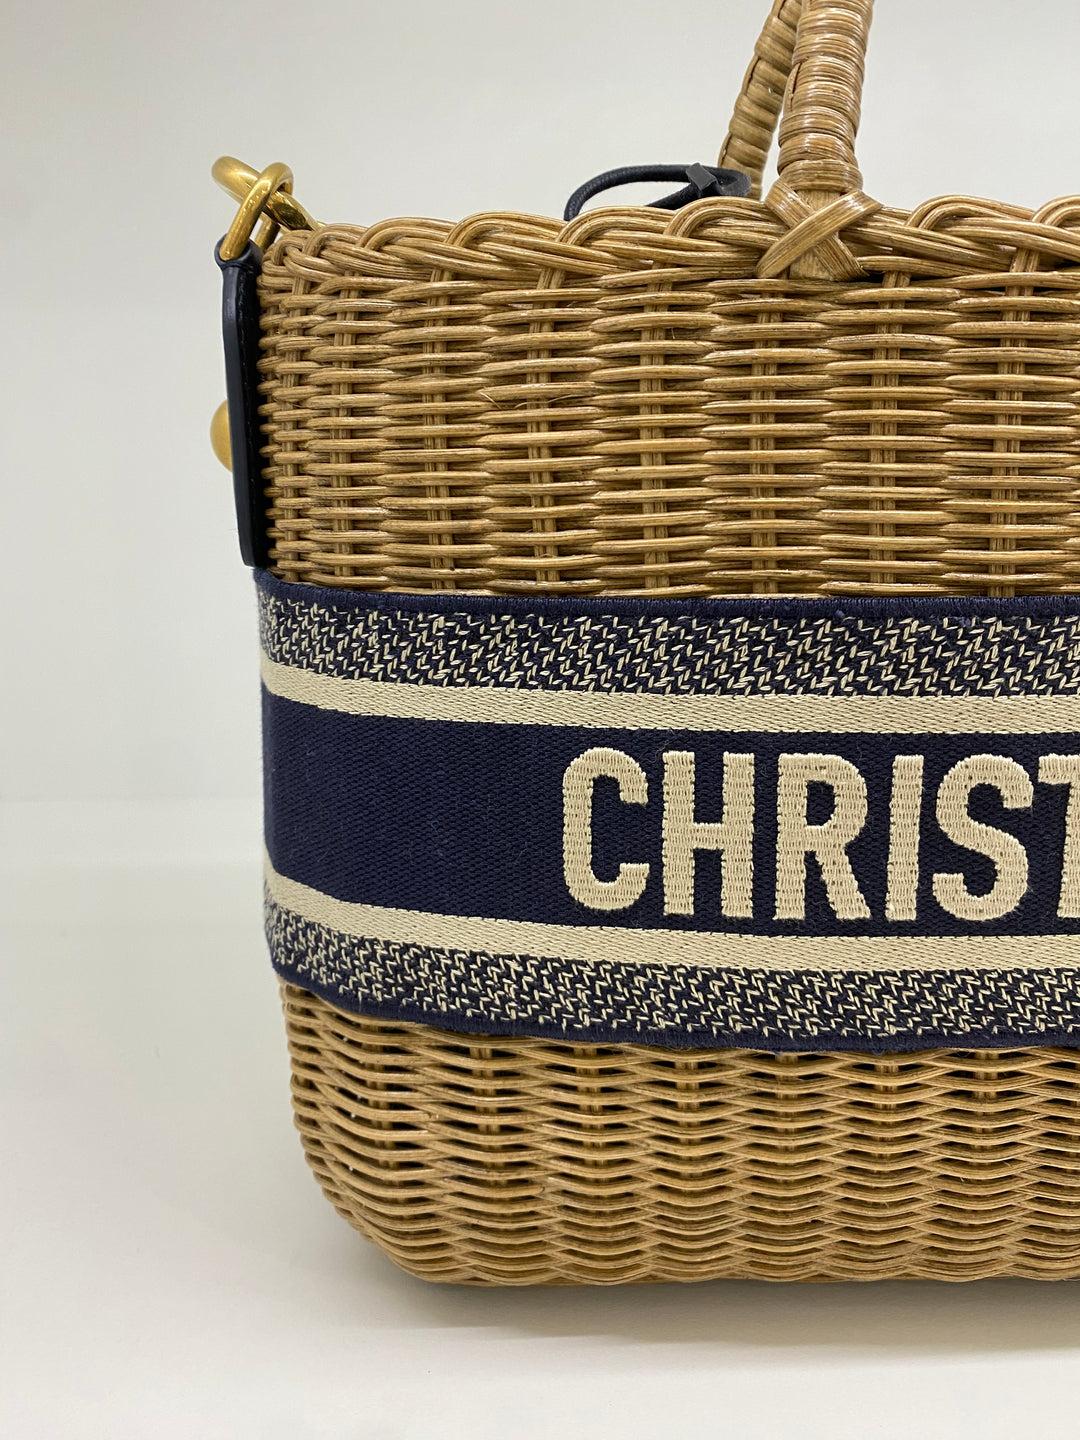 Christian Dior Wicker Bag In Excellent Condition For Sale In Double Bay, AU